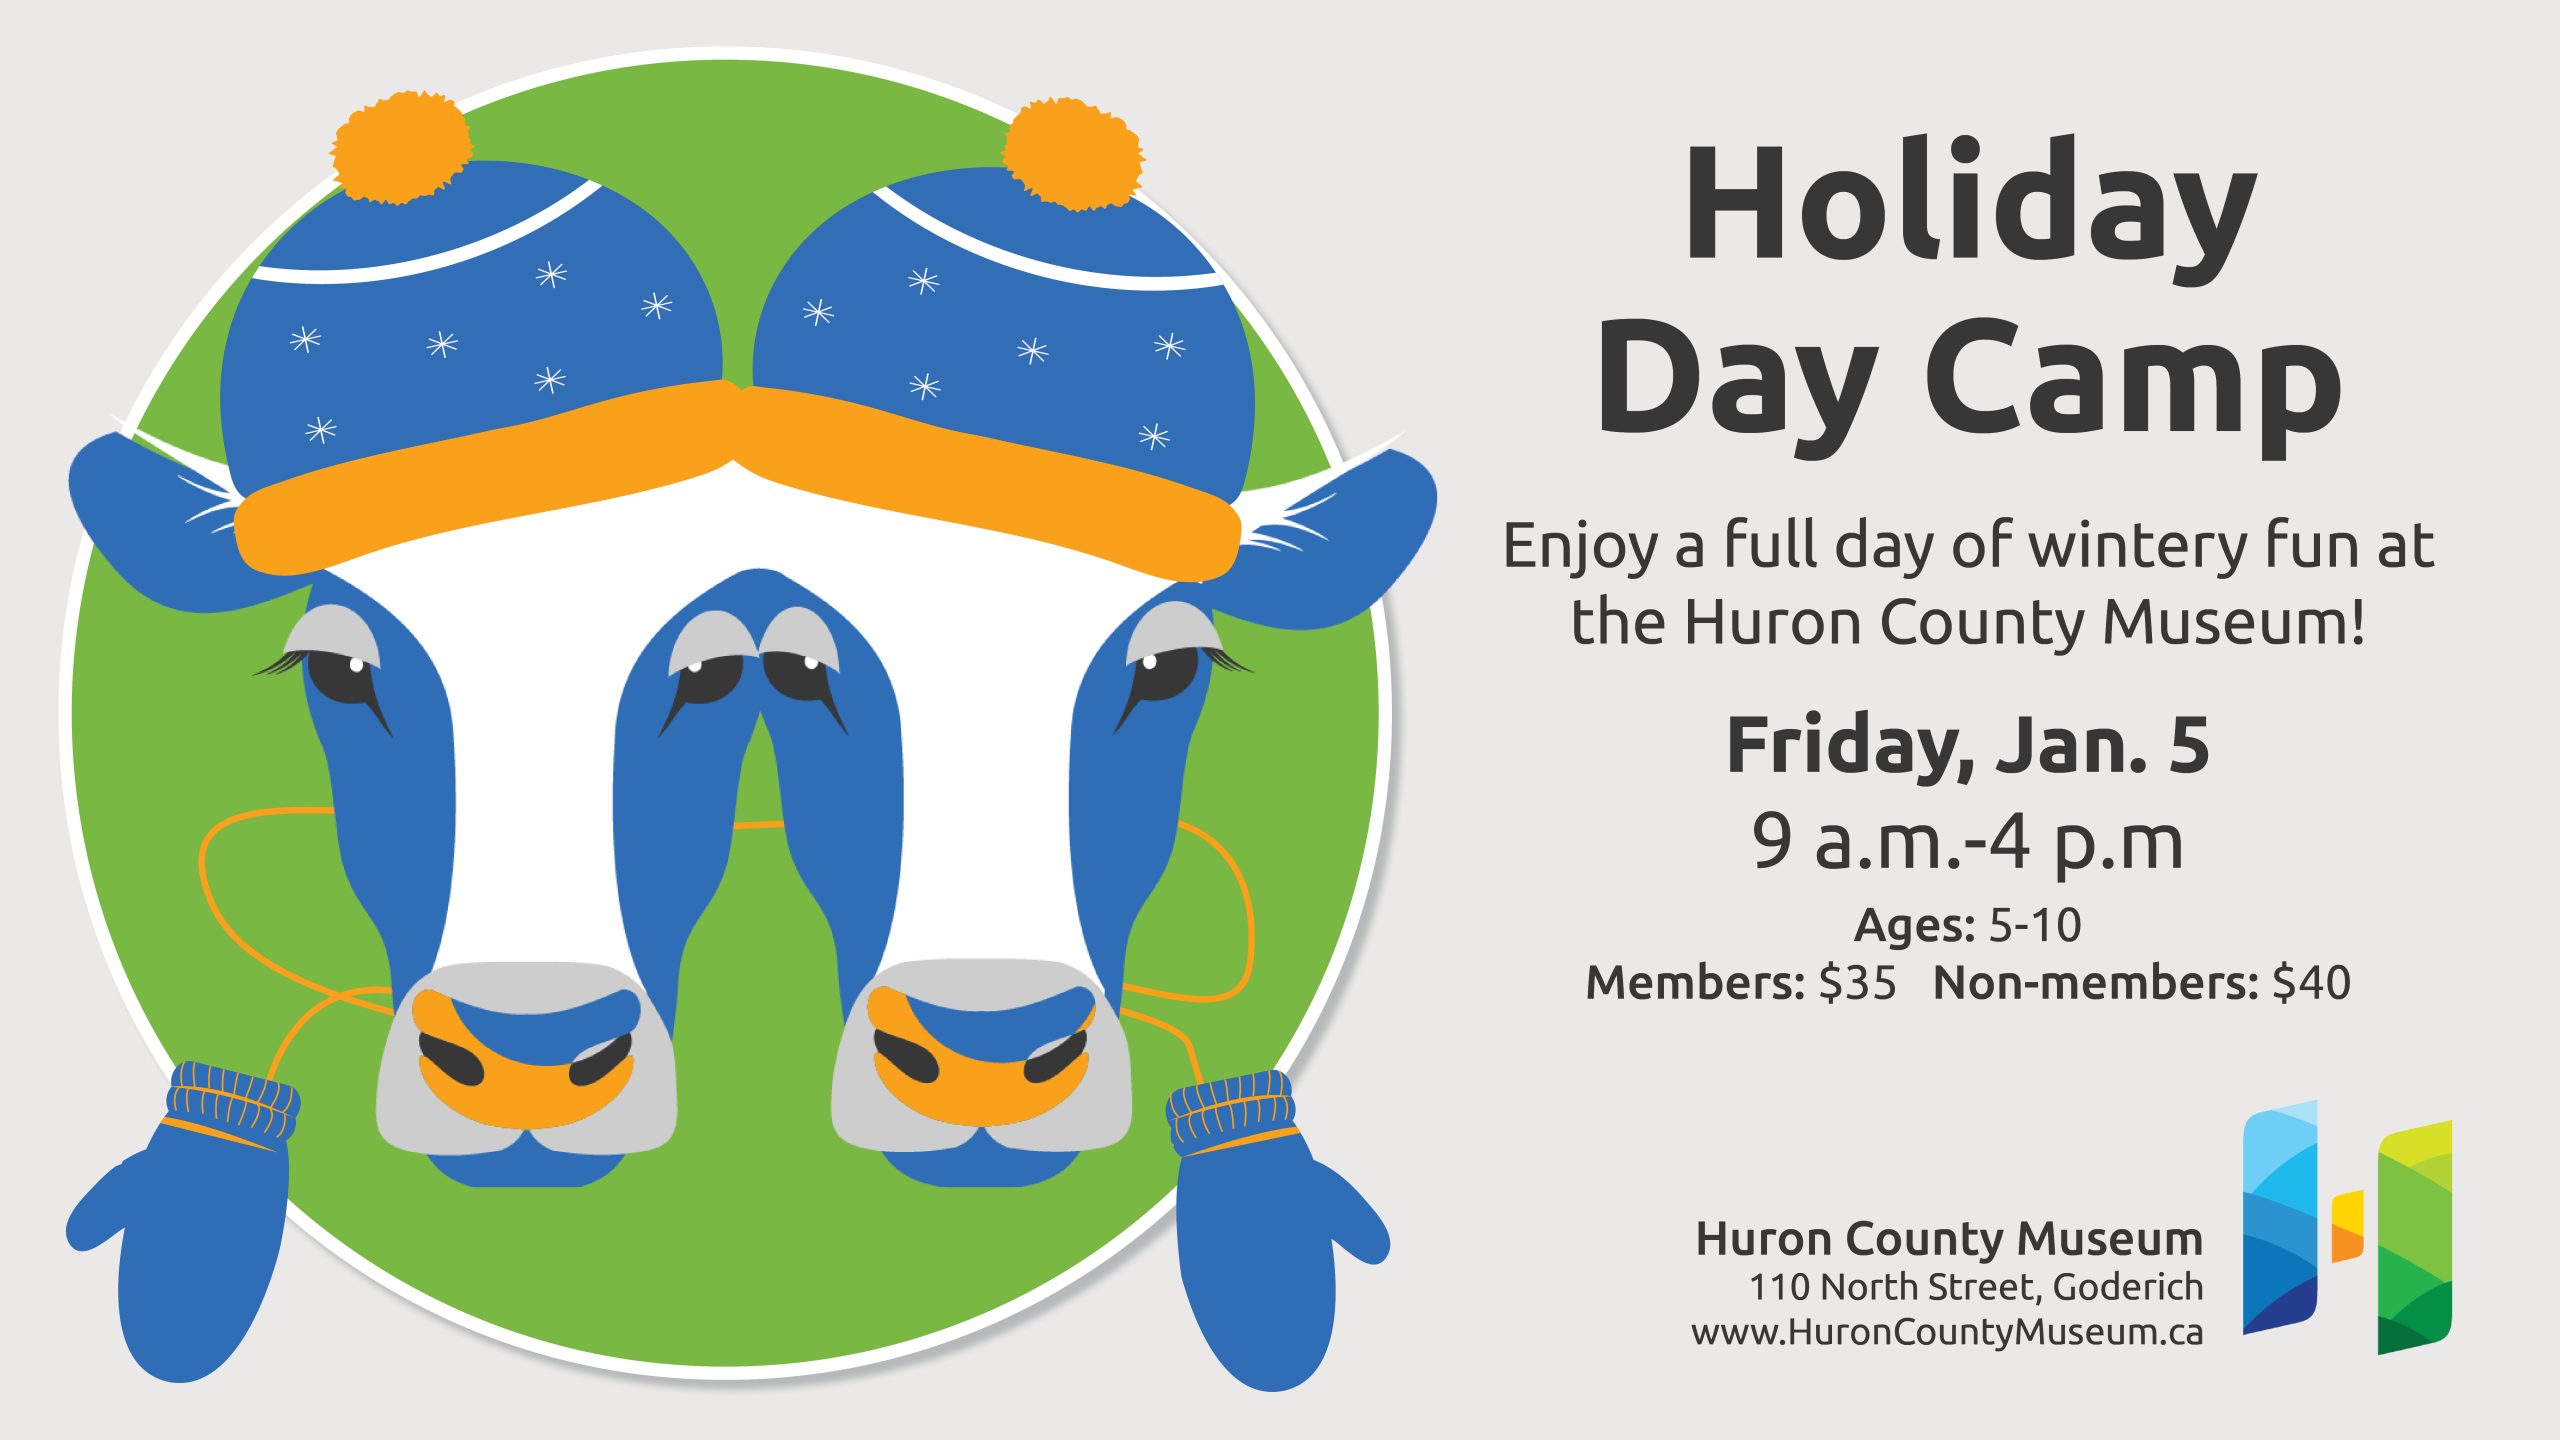 Illustration of our two-headed calf wearing winter hats and mitts with text promoting holiday day camp at the Huron County Museum